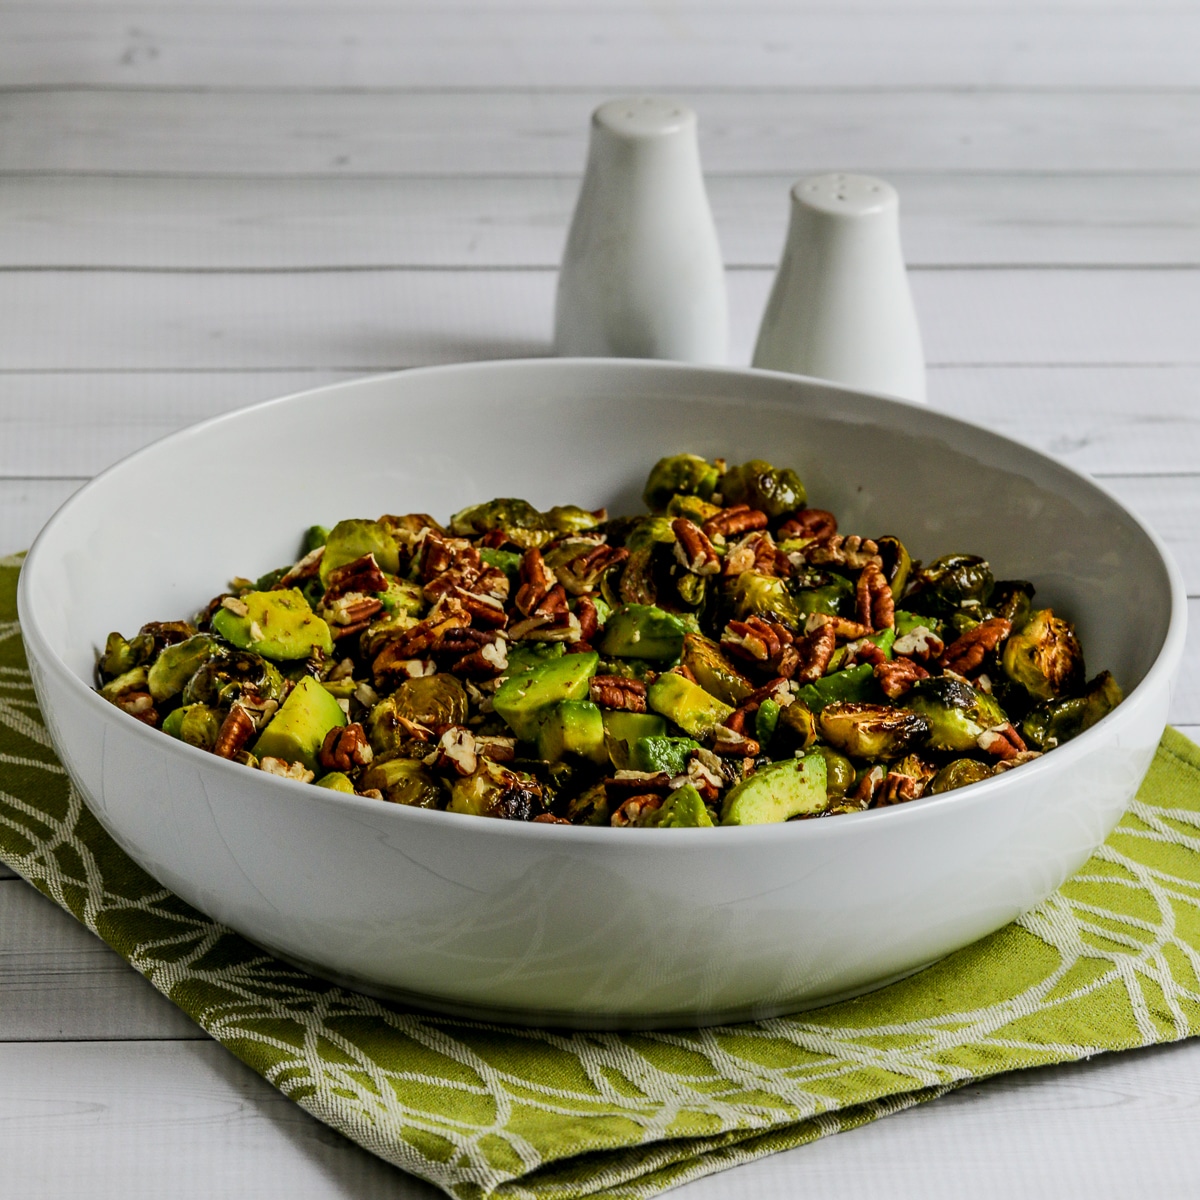 Square image of roasted brussels sprouts with avocado and walnuts on a serving plate with salt and pepper in the background